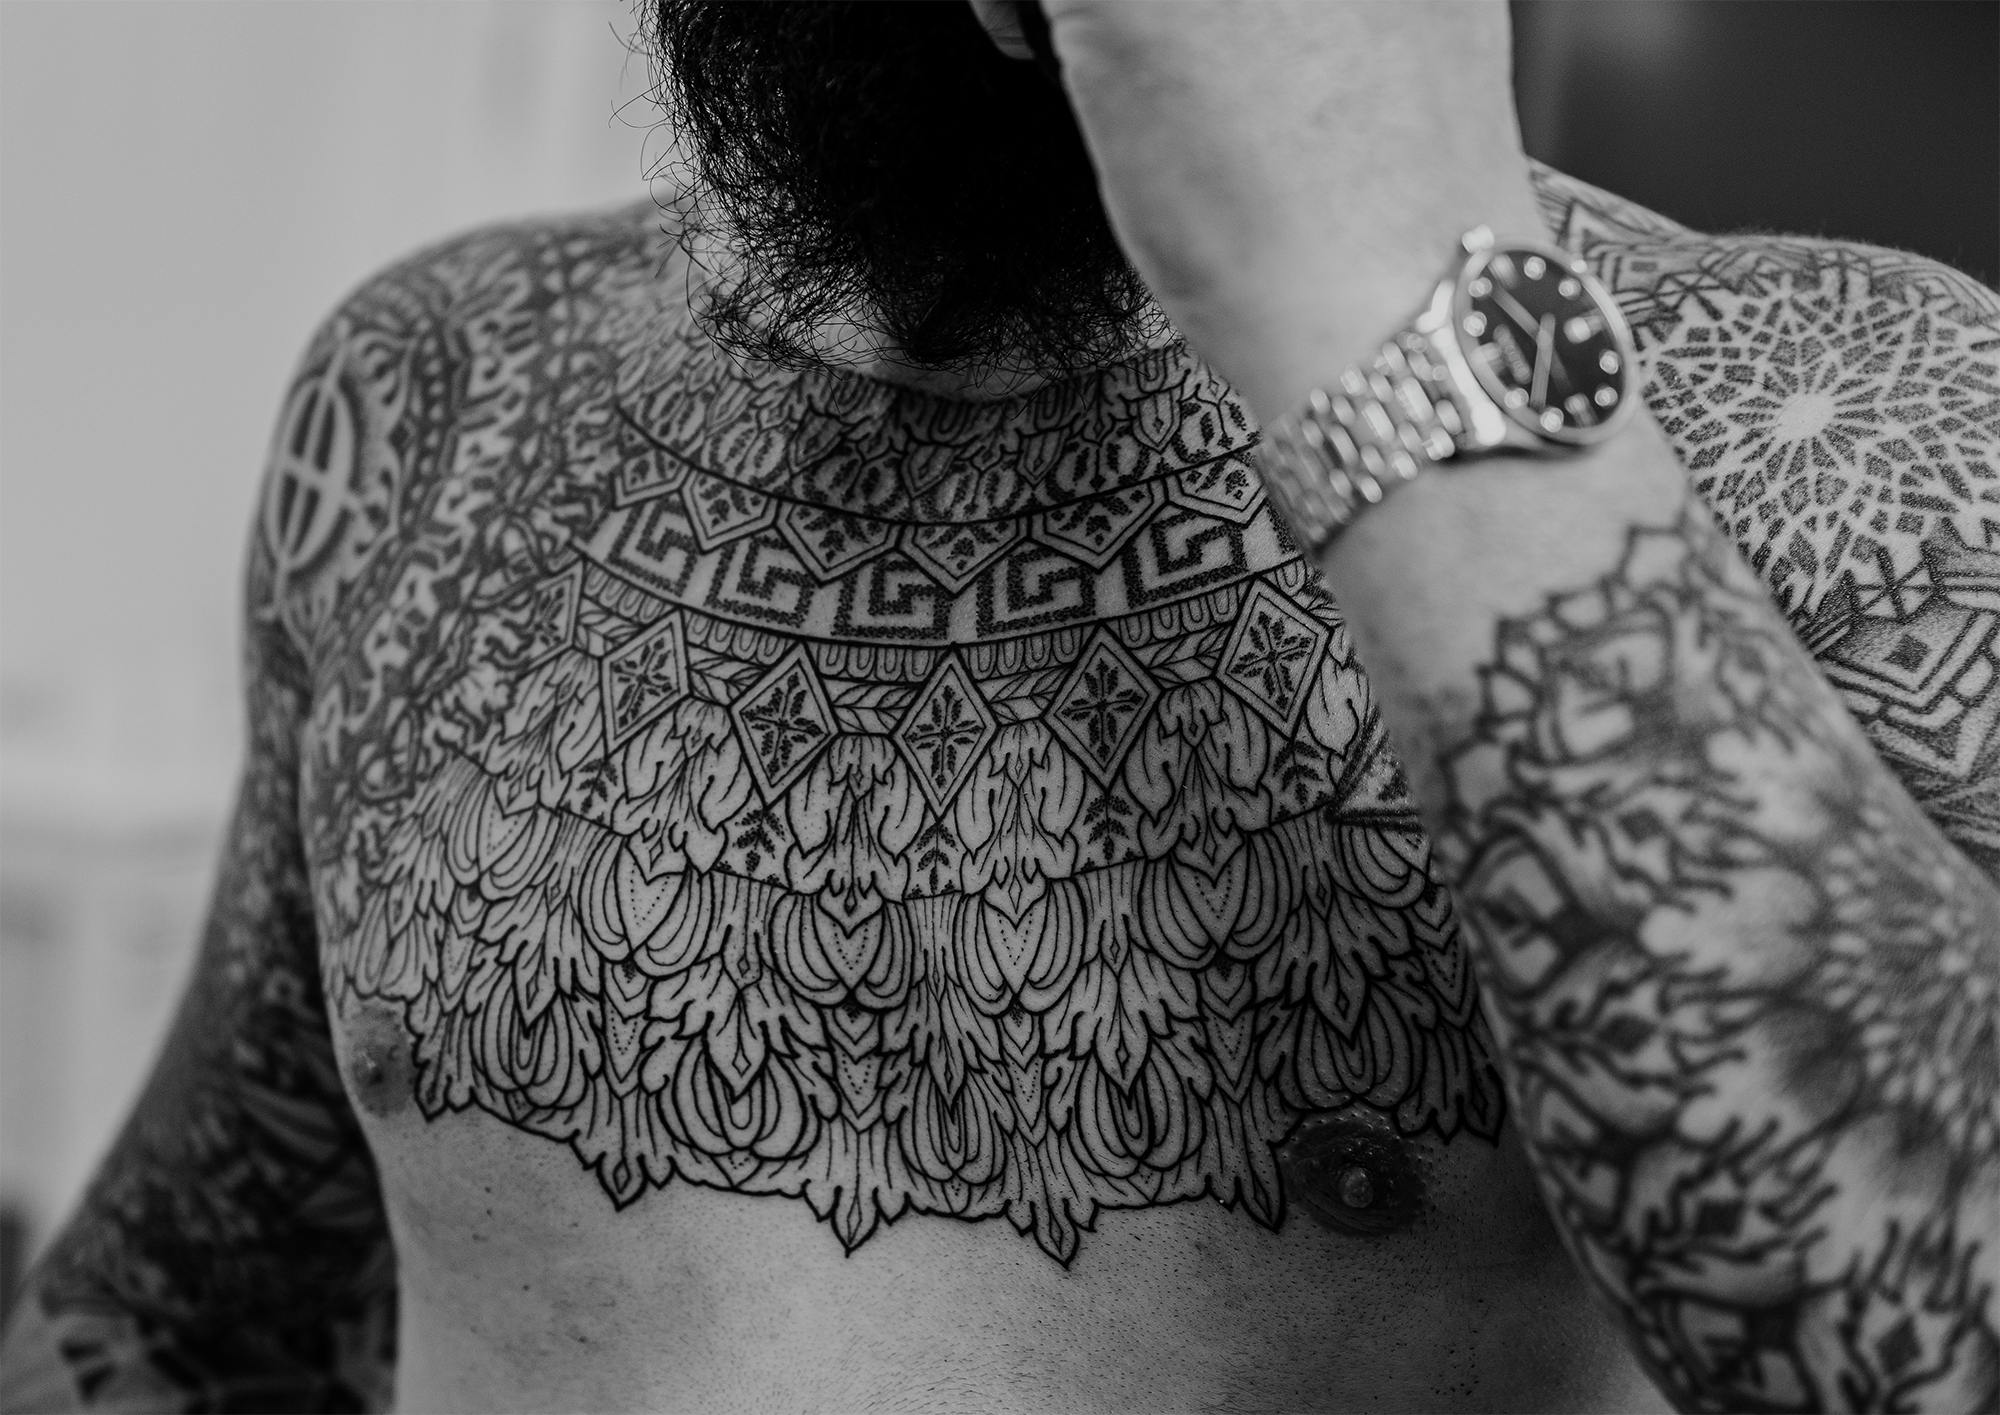 On the chest of his client is one of Nilsen's most intricate tattoos.